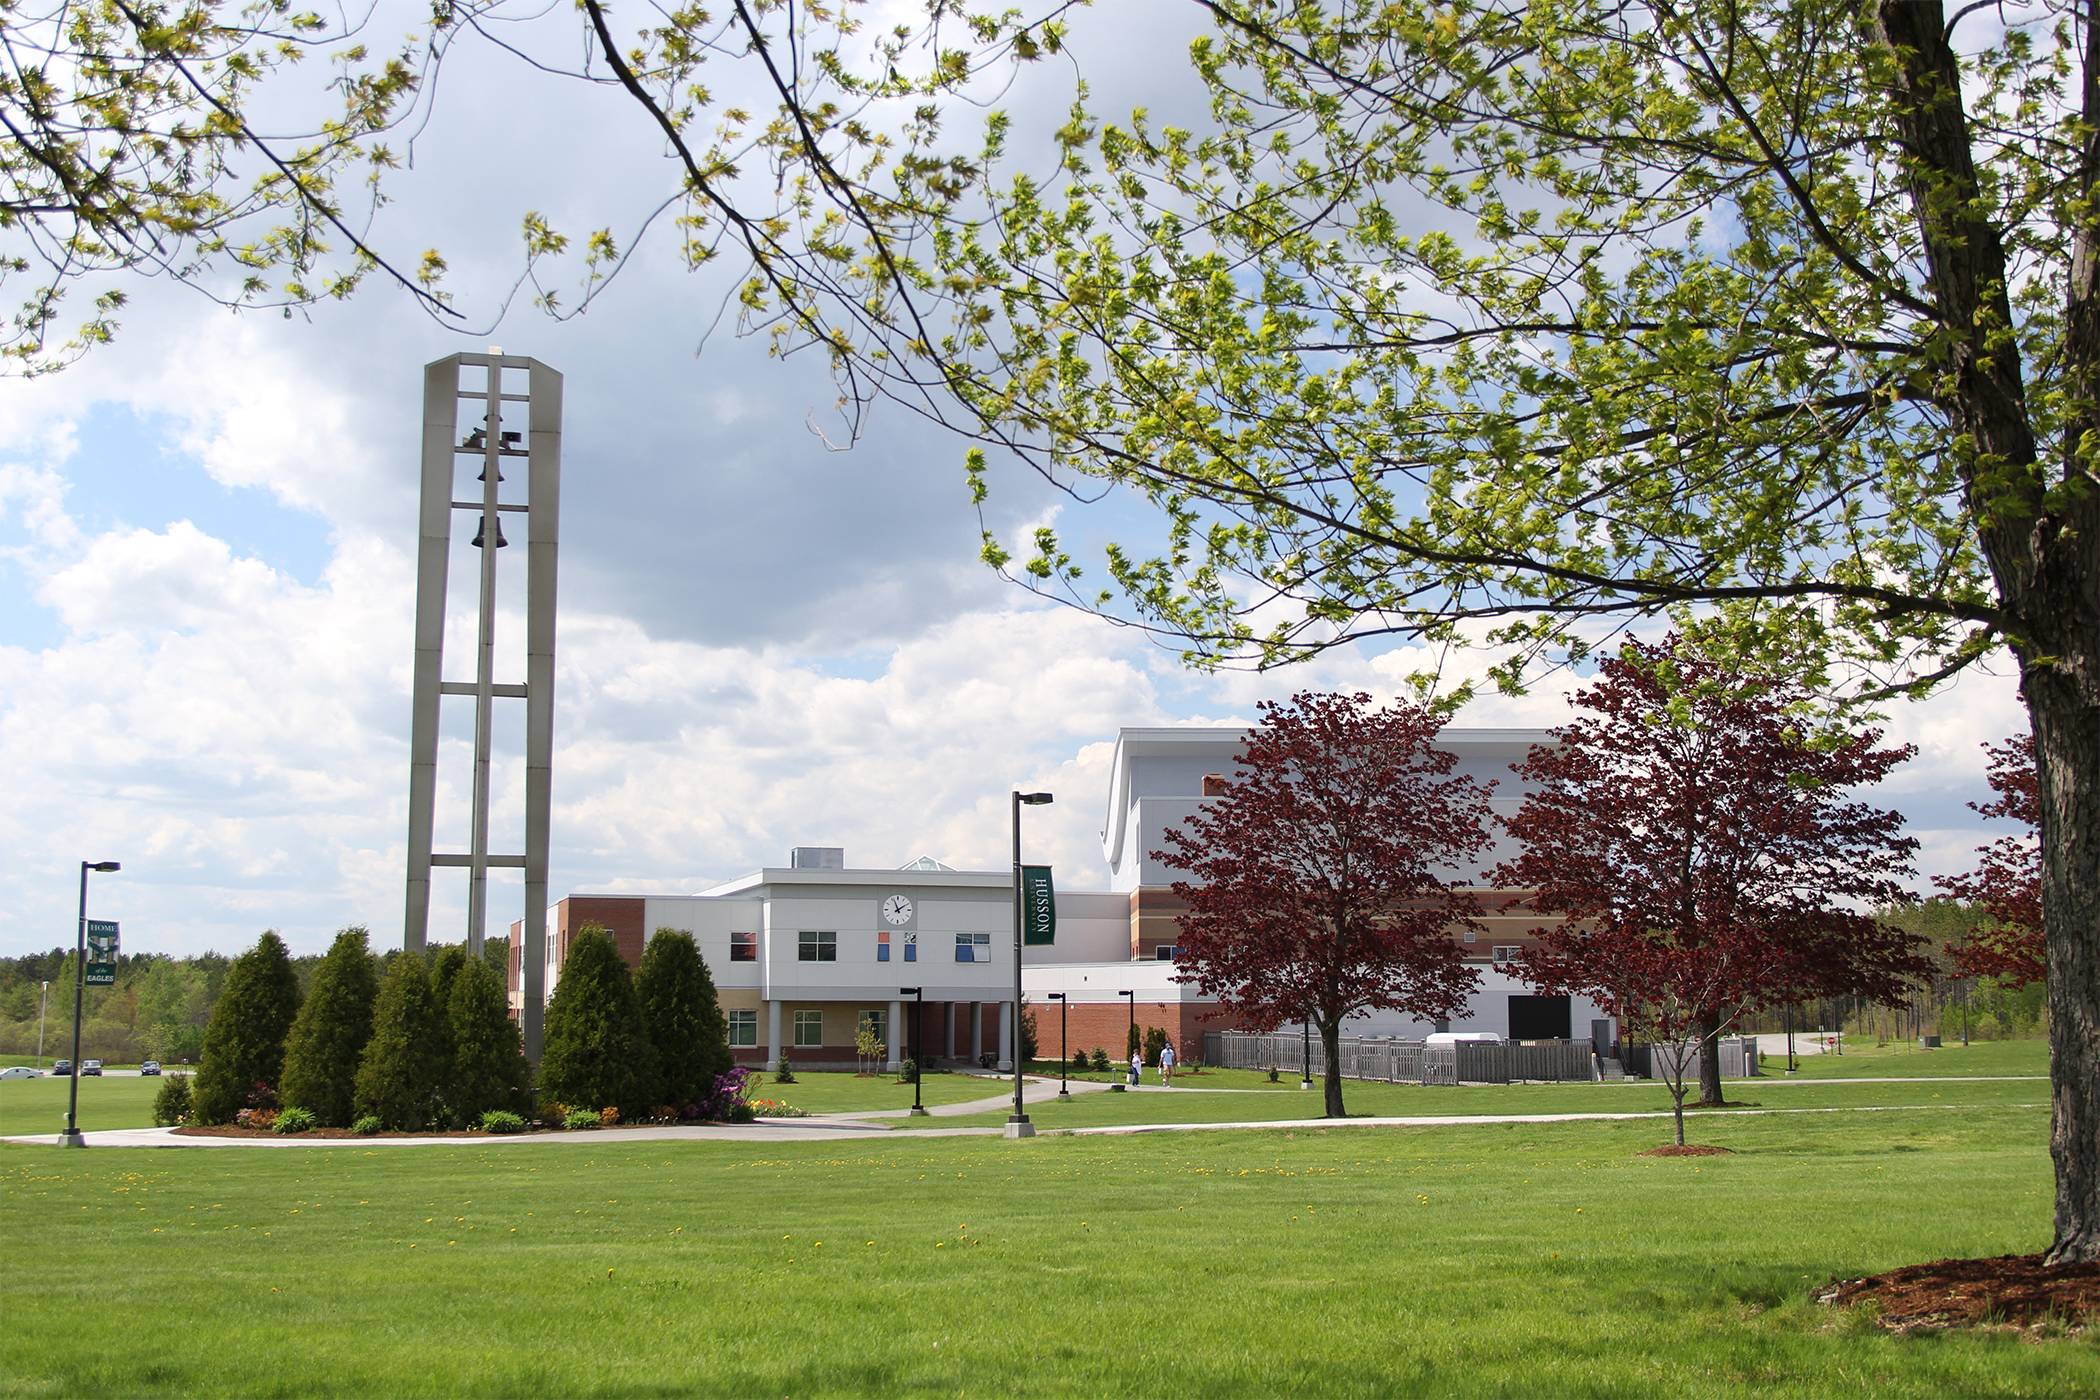 Husson University's New England School of Communications is located on a beautiful 208-acre campus in scenic Bangor, Maine